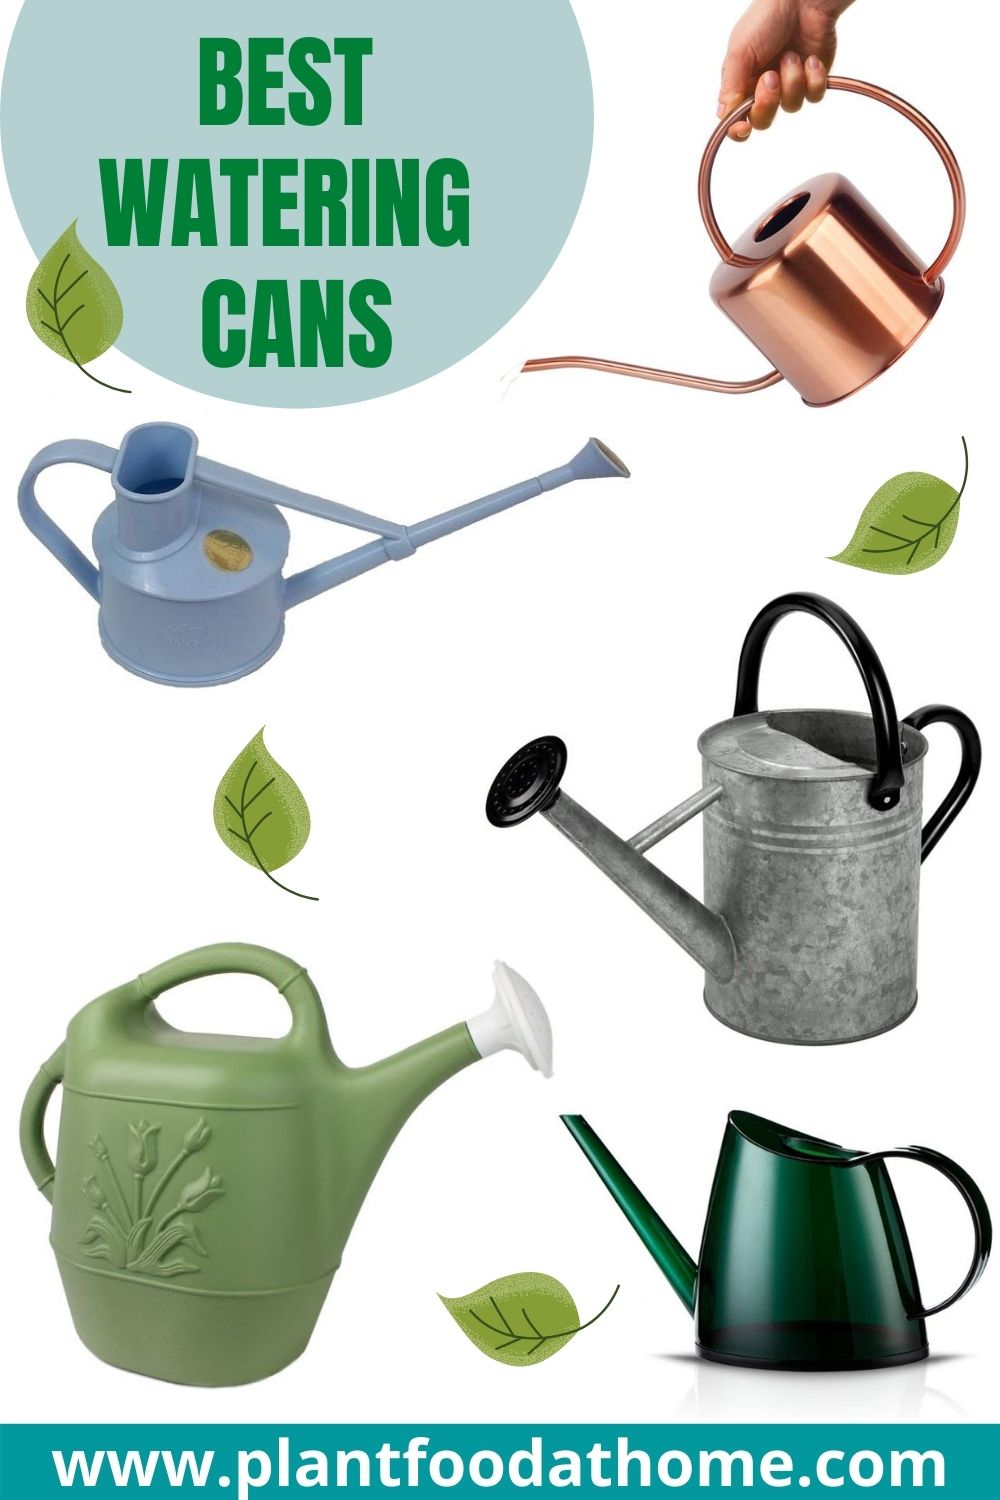 The Best Watering Cans